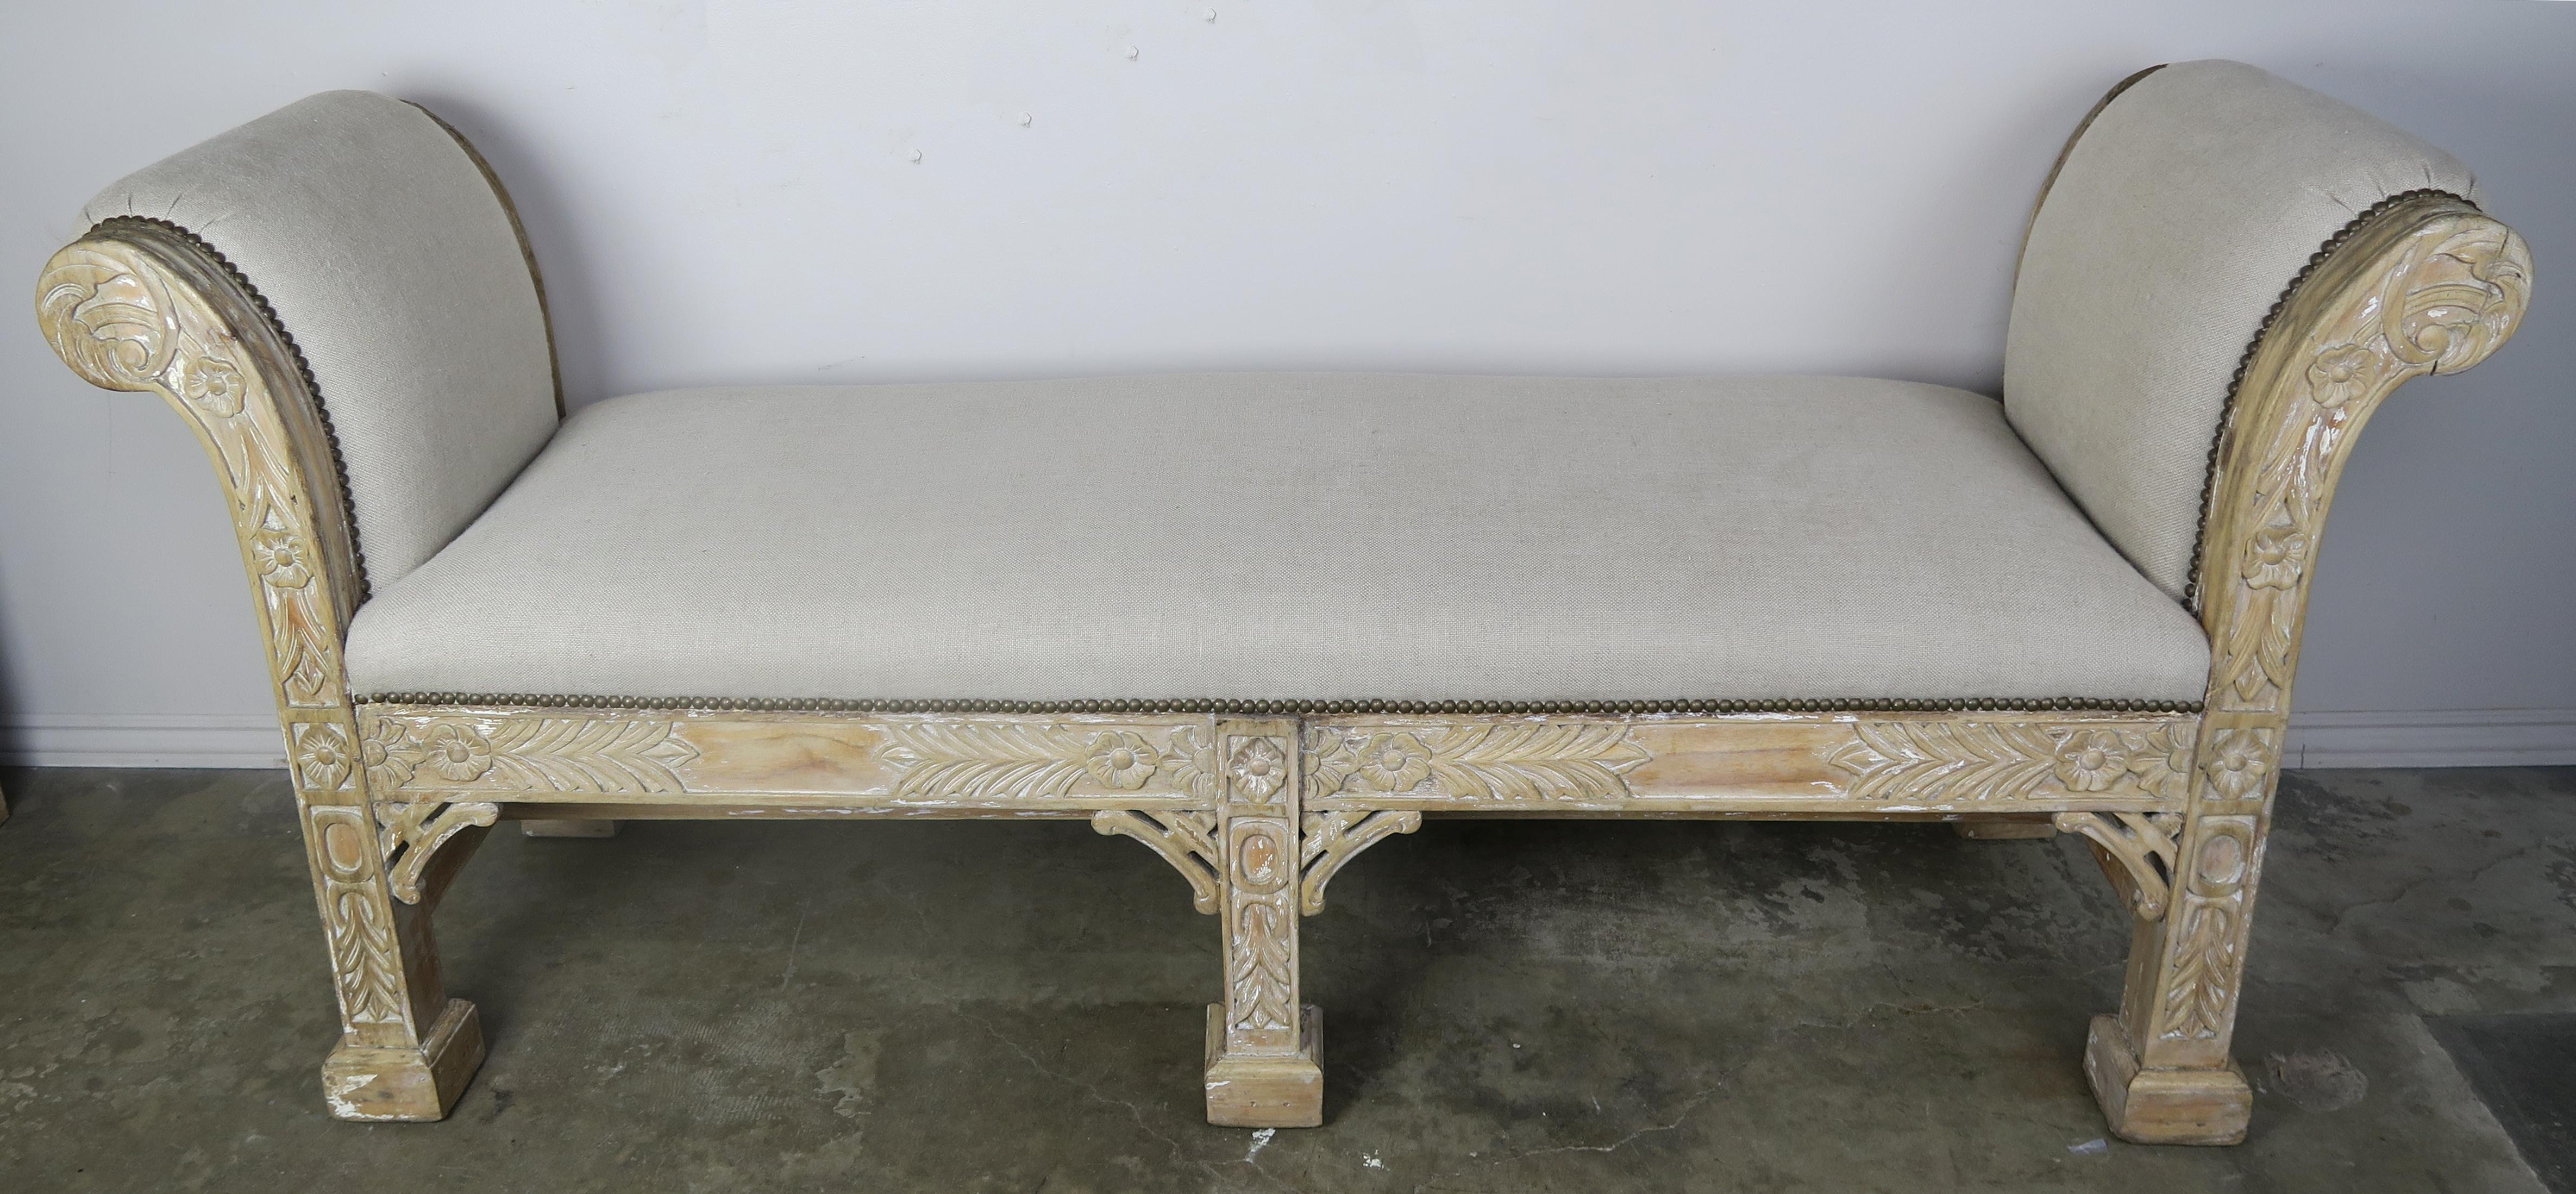 English chinoiserie style six-legged carved natural wood bench newly upholstered in Belgium linen with antique brass nailhead trim detail.
Measures: Seat height 21